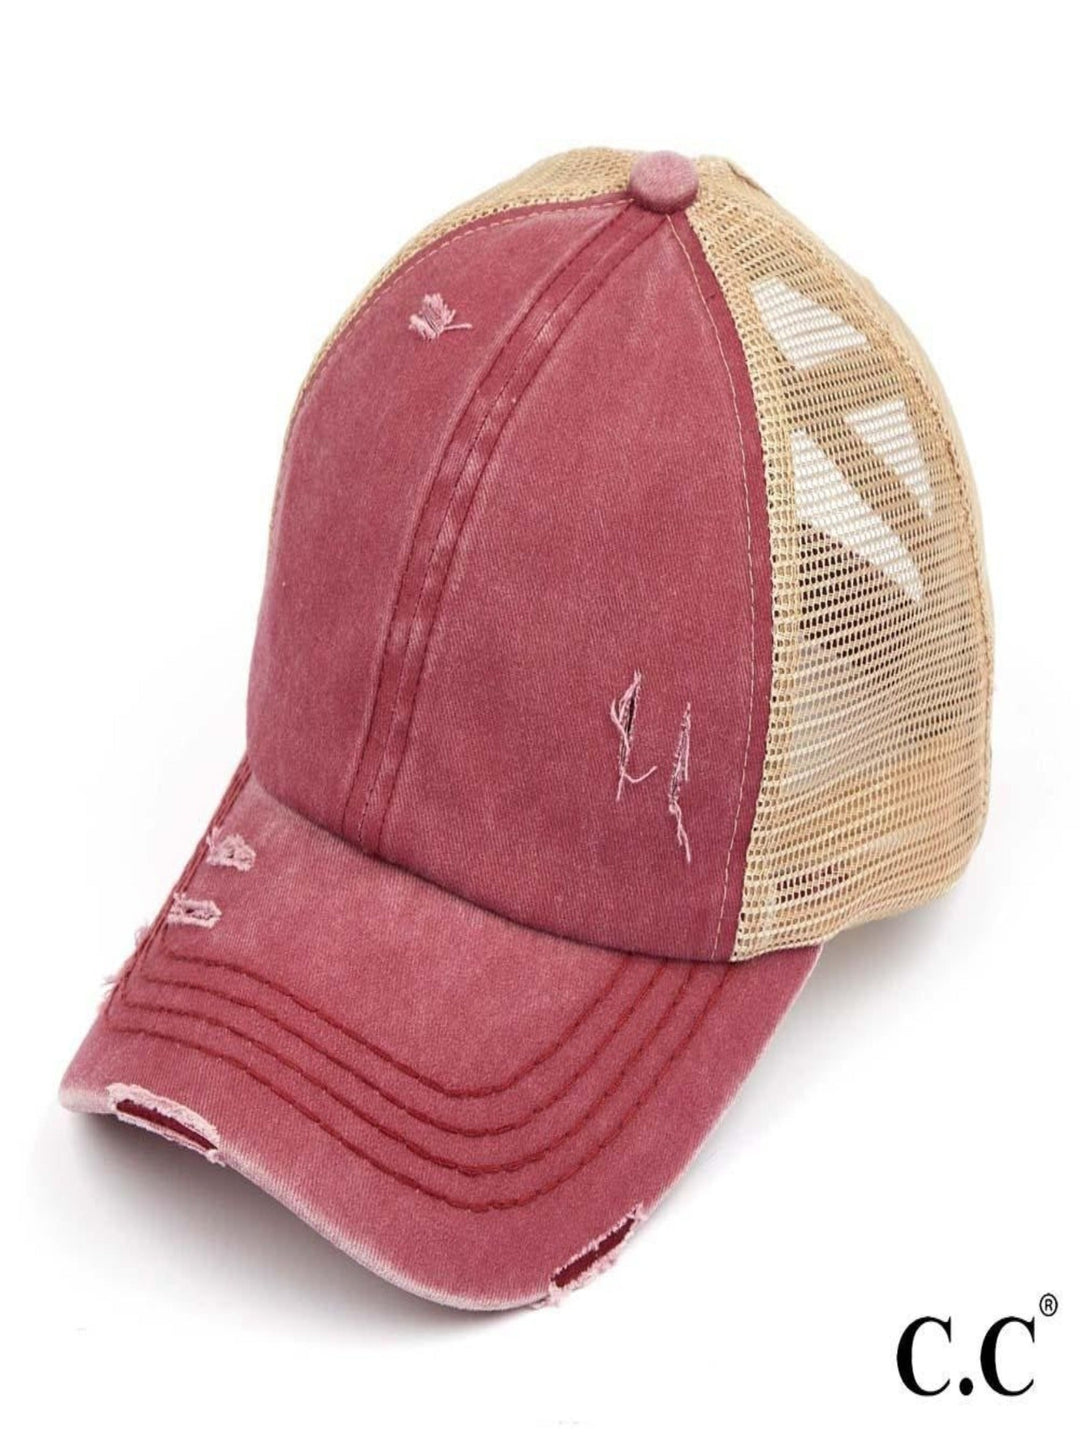 Distressed Washed Criss Cross Ladder Ponytail Hat, Berry